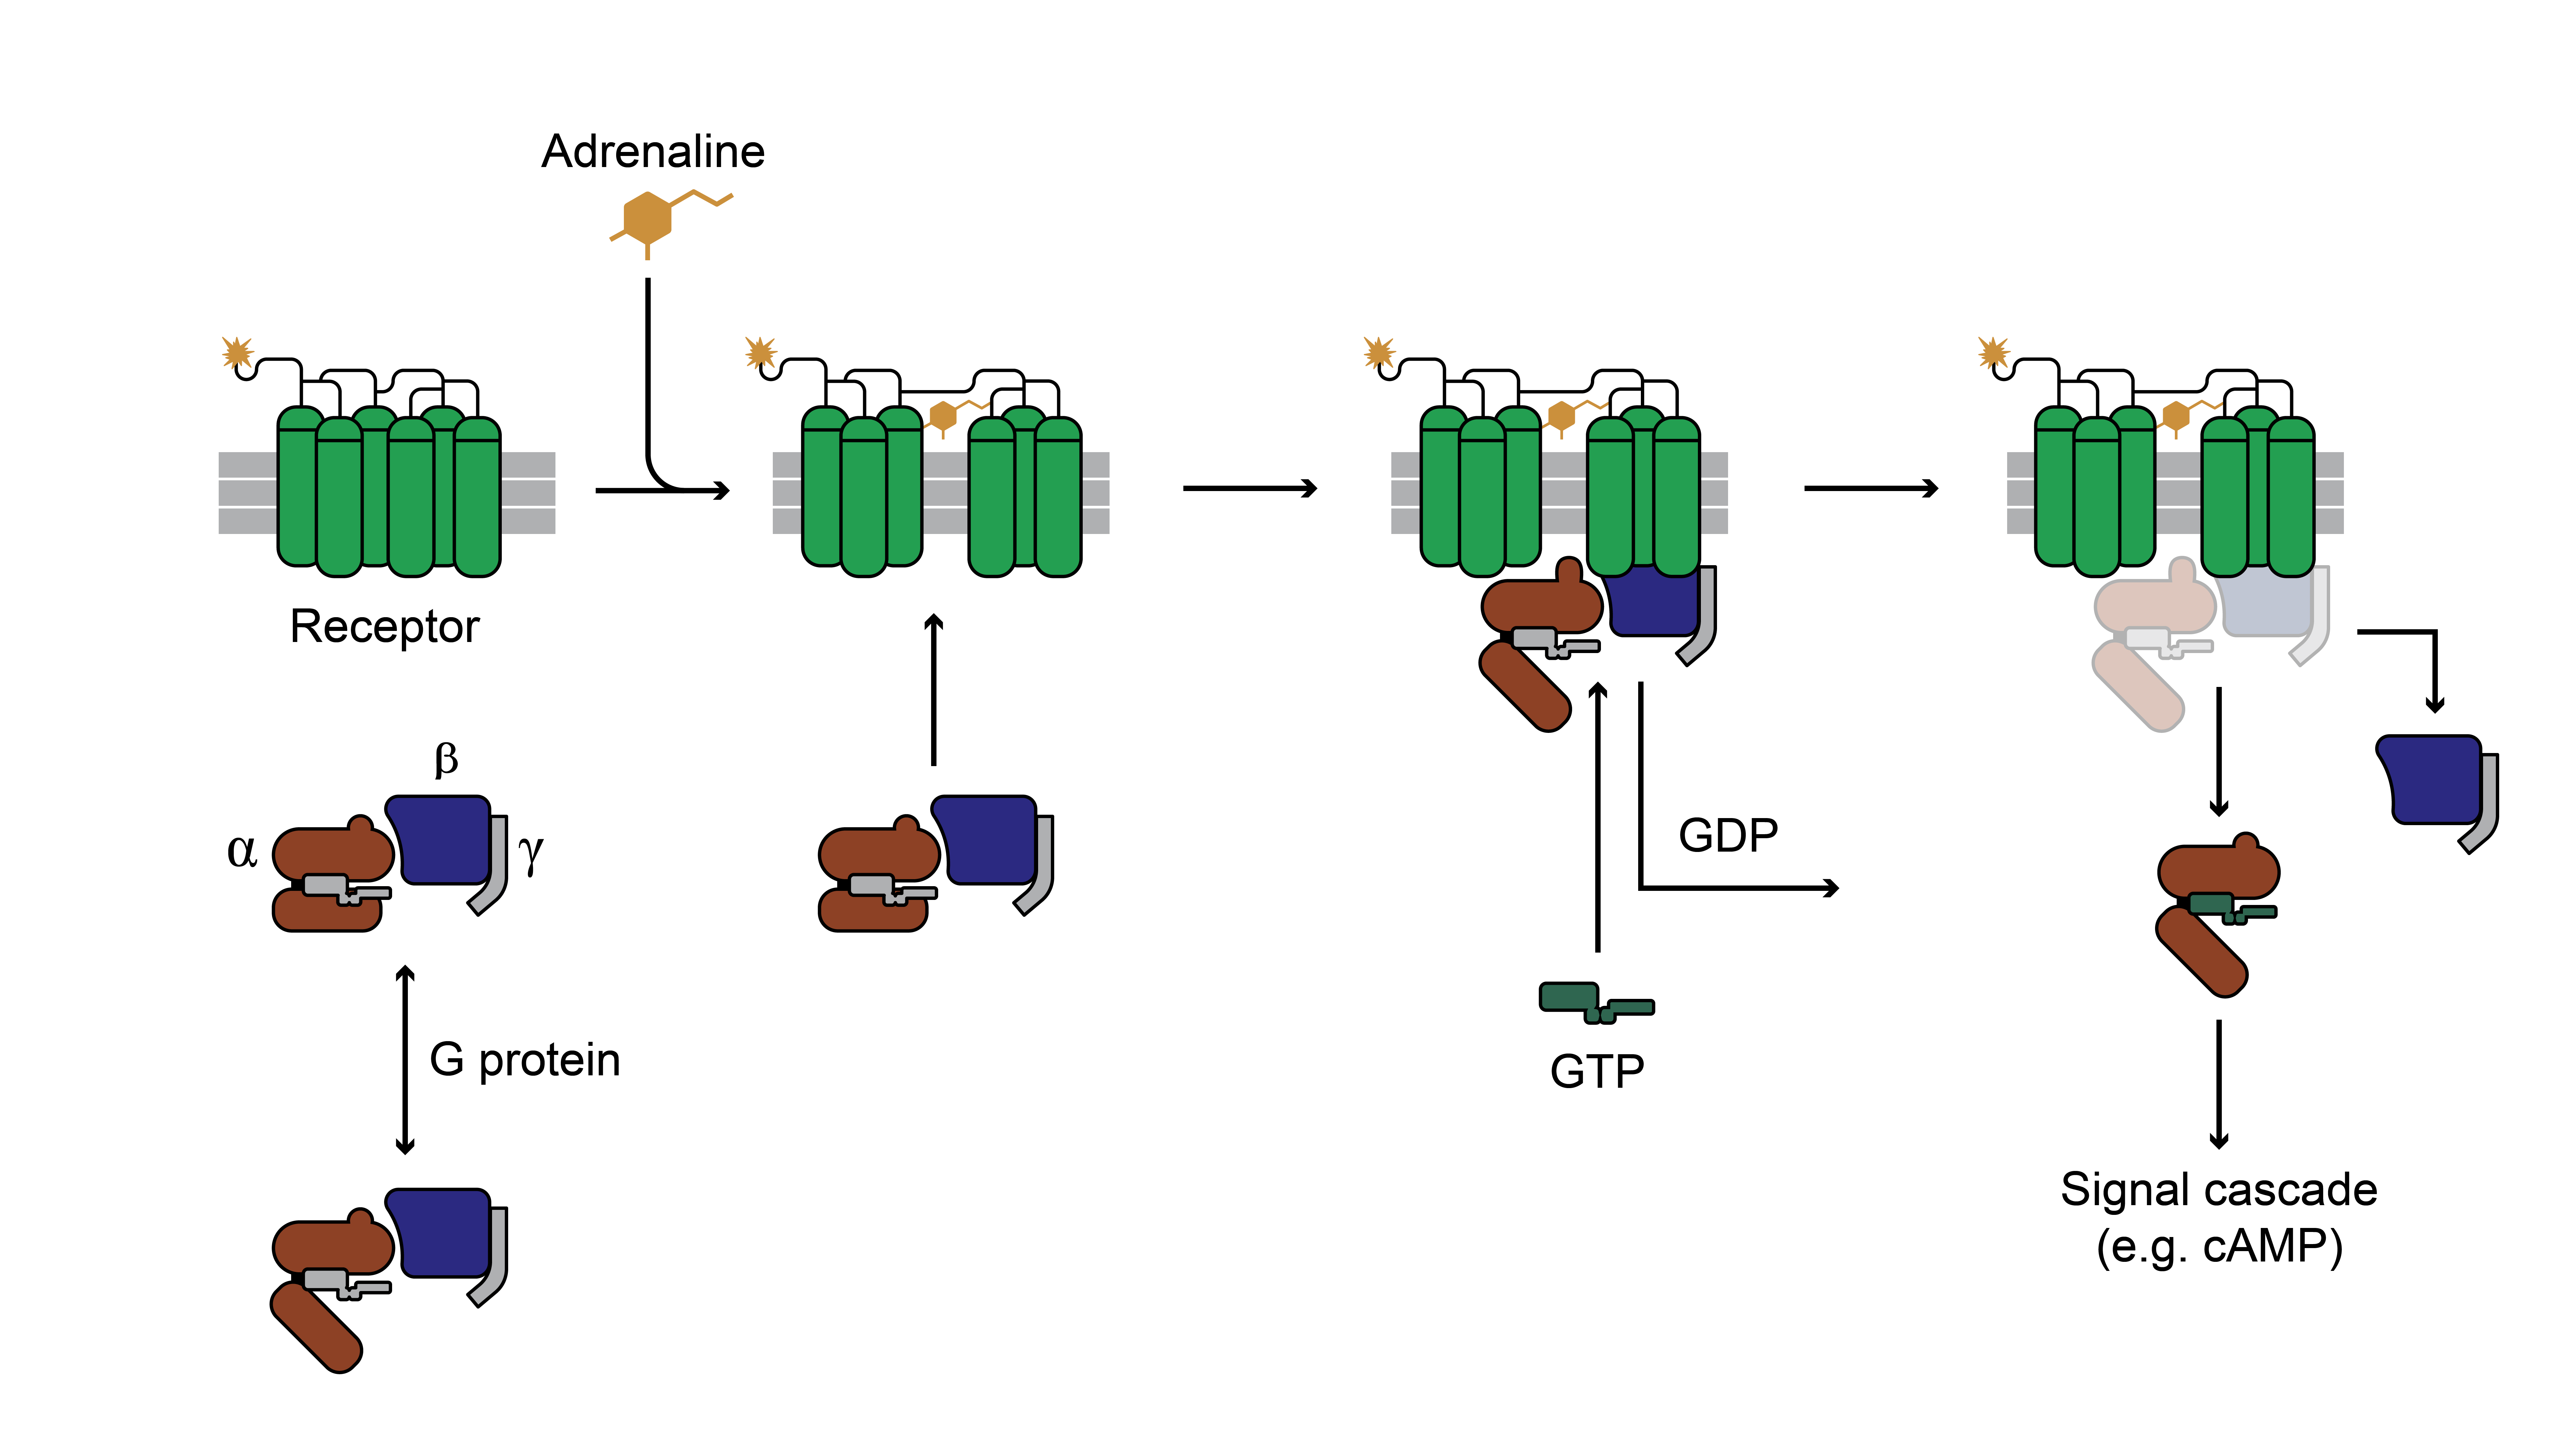 The GPCR-activation pathway